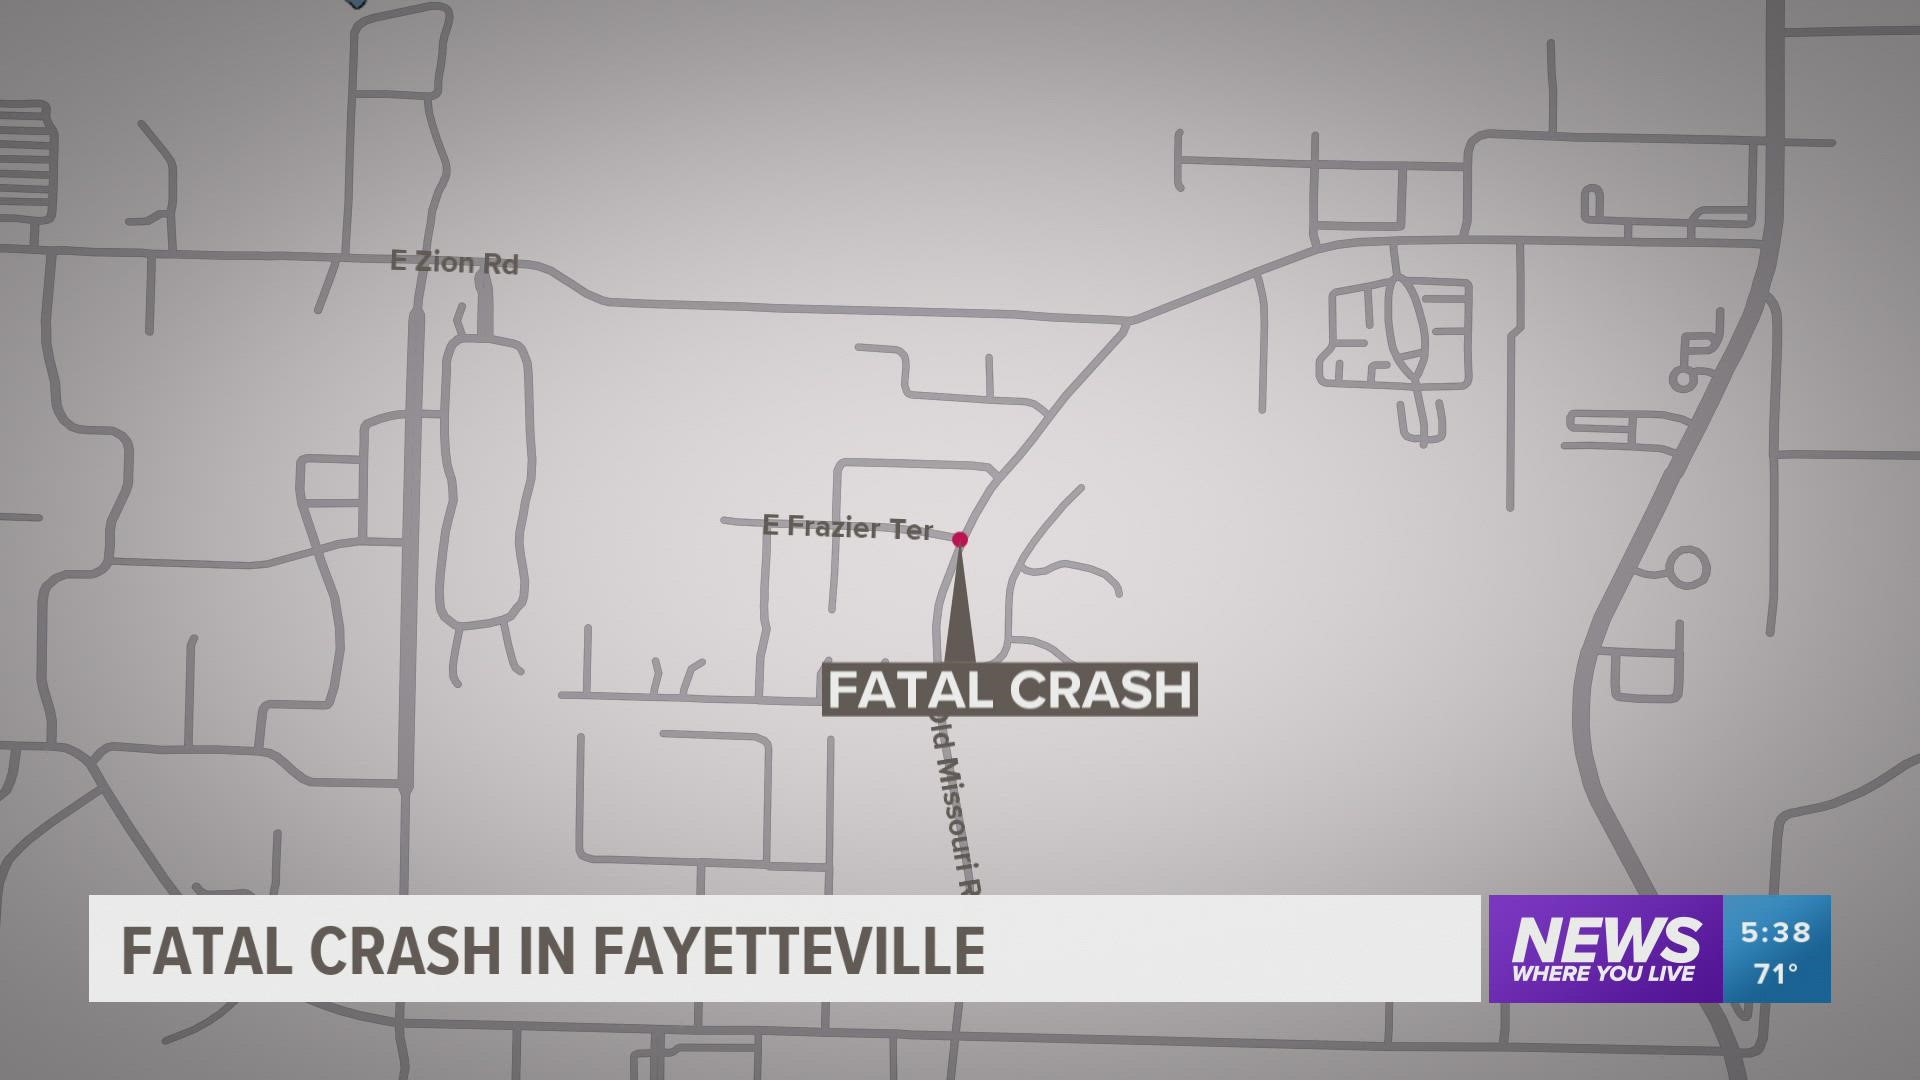 According to the Arkansas Department of Public Safety, the crash happened at 8:38 p.m.